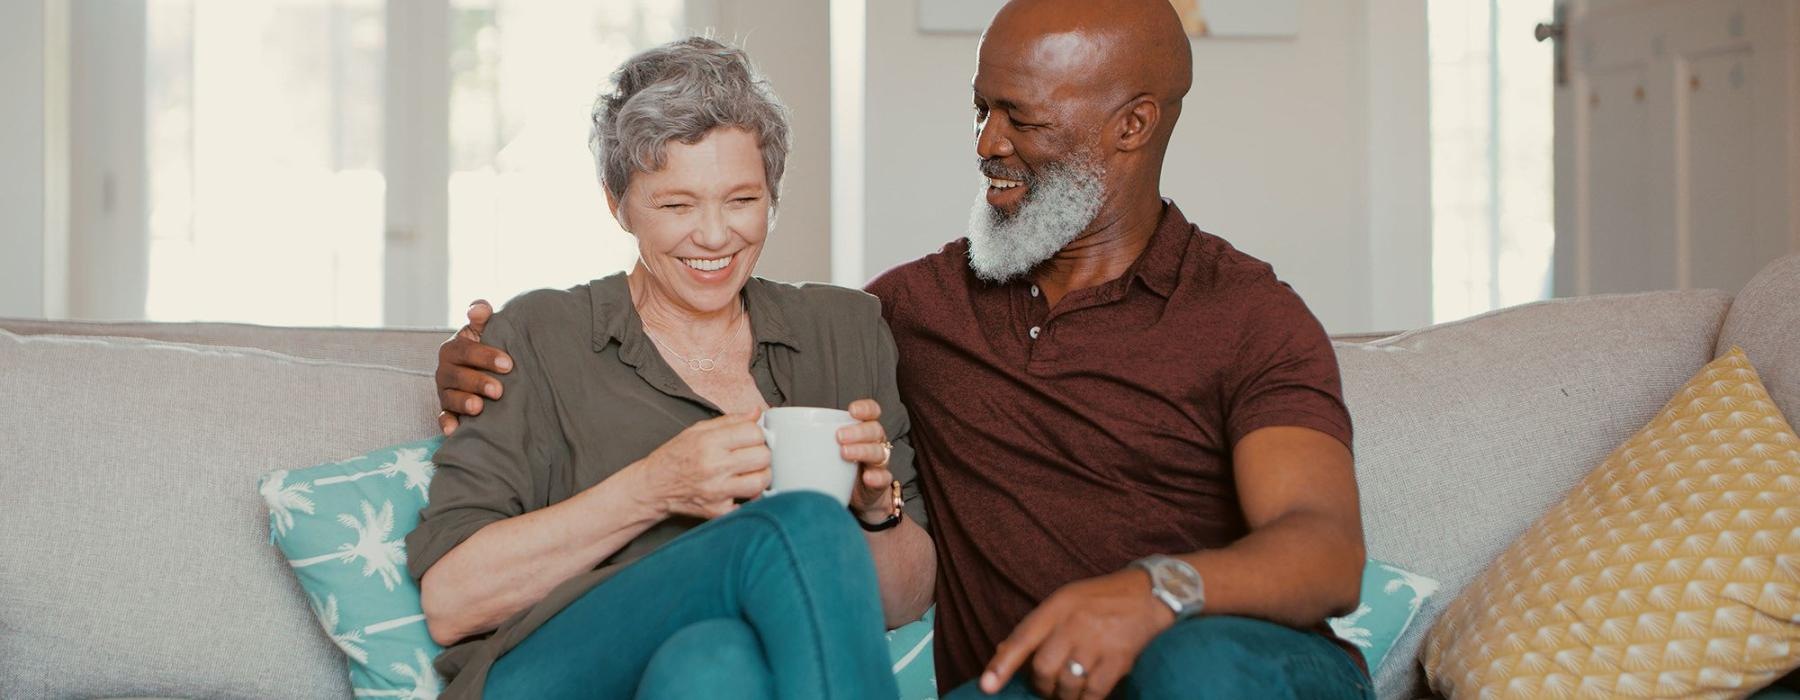 smiling, older couple, sit together on a couch